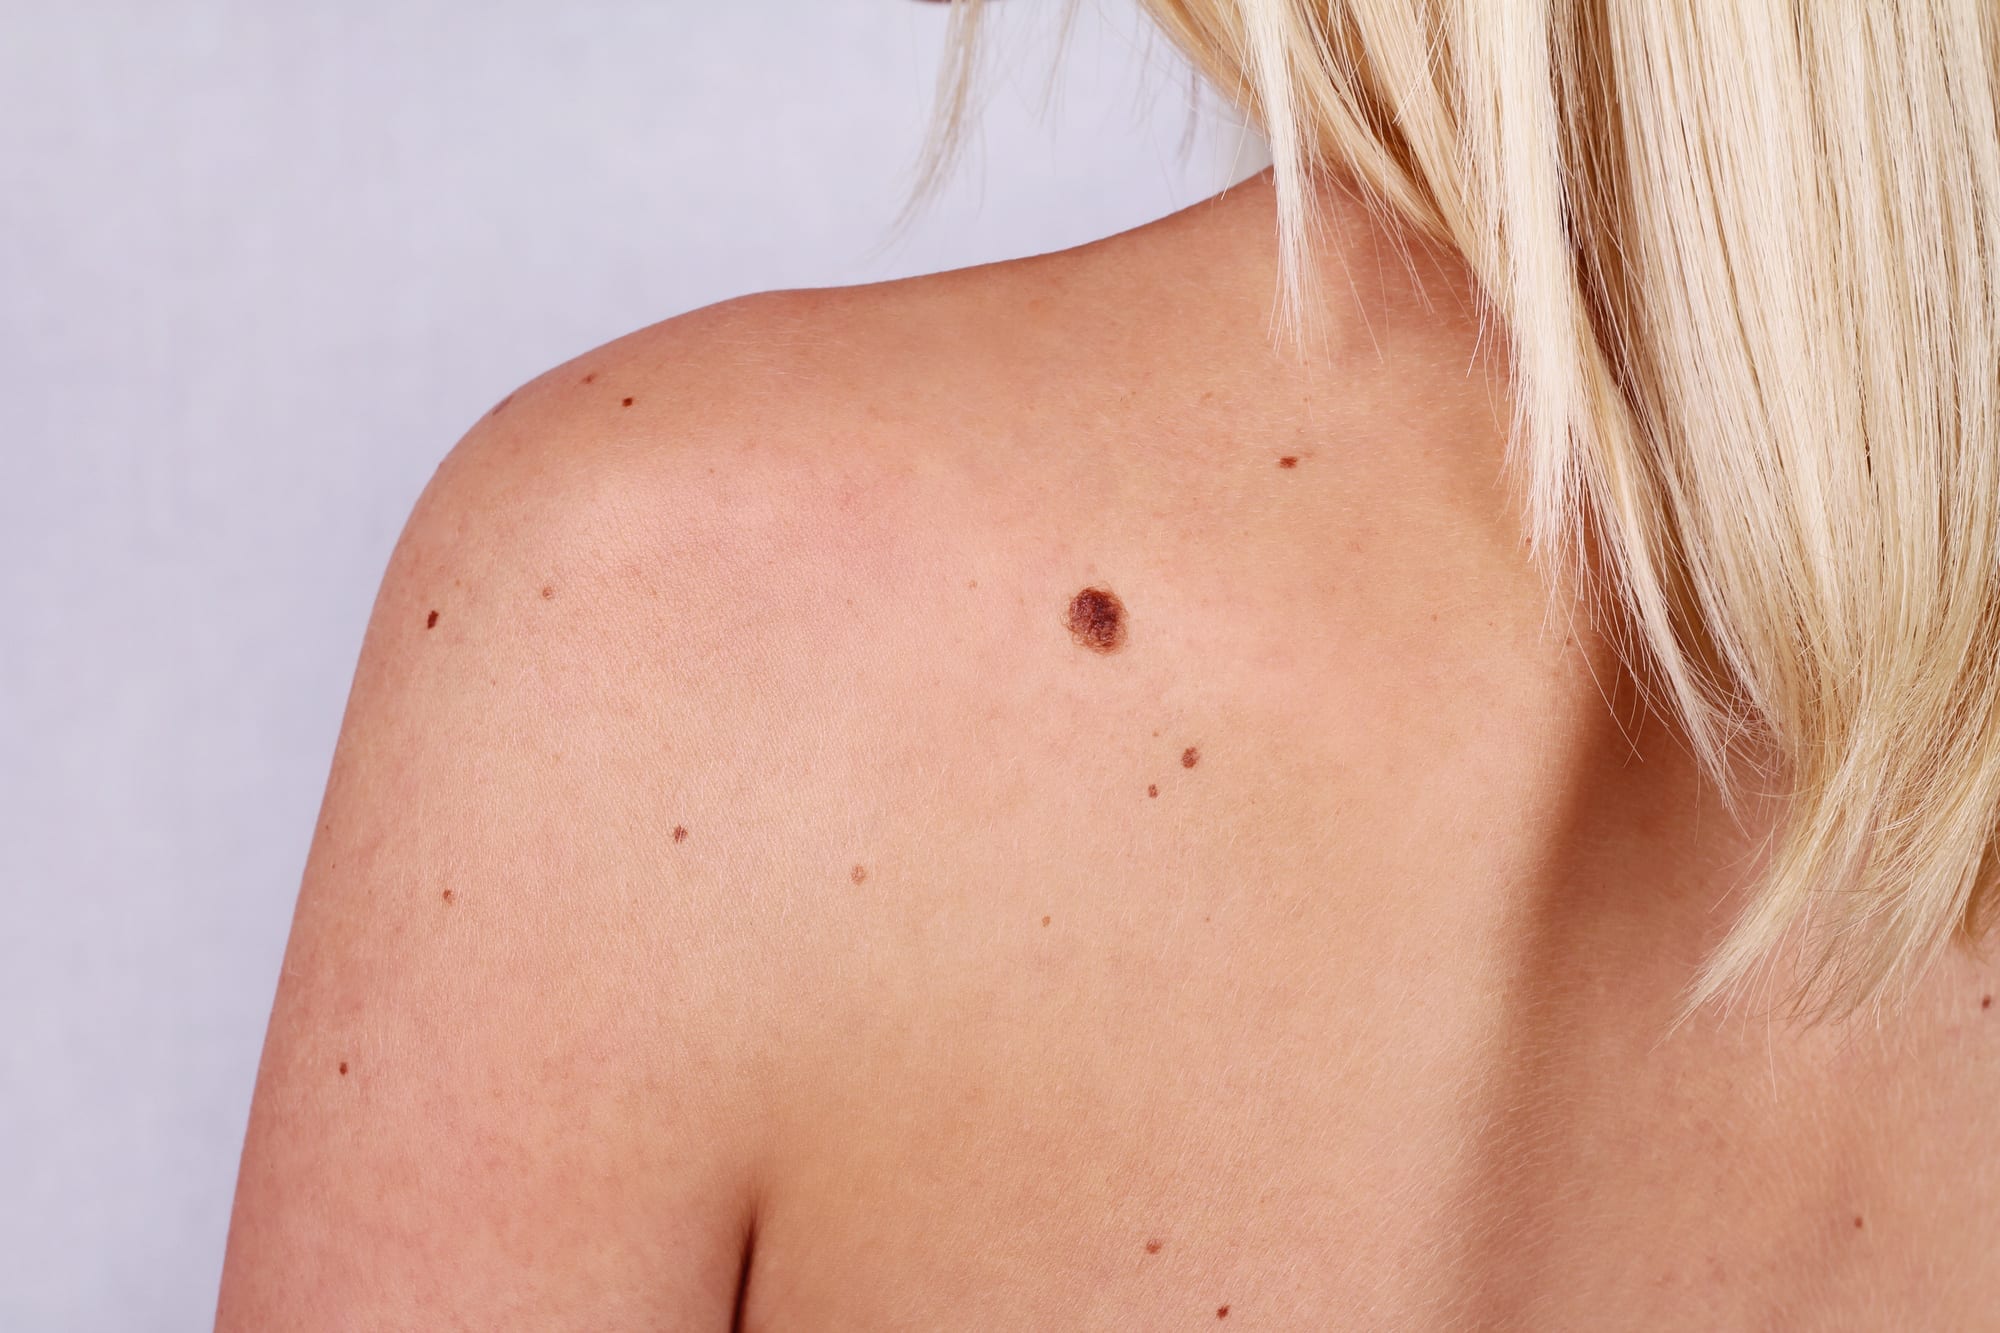 Young woman with at birthmark on her back, skin. Checking benign moles